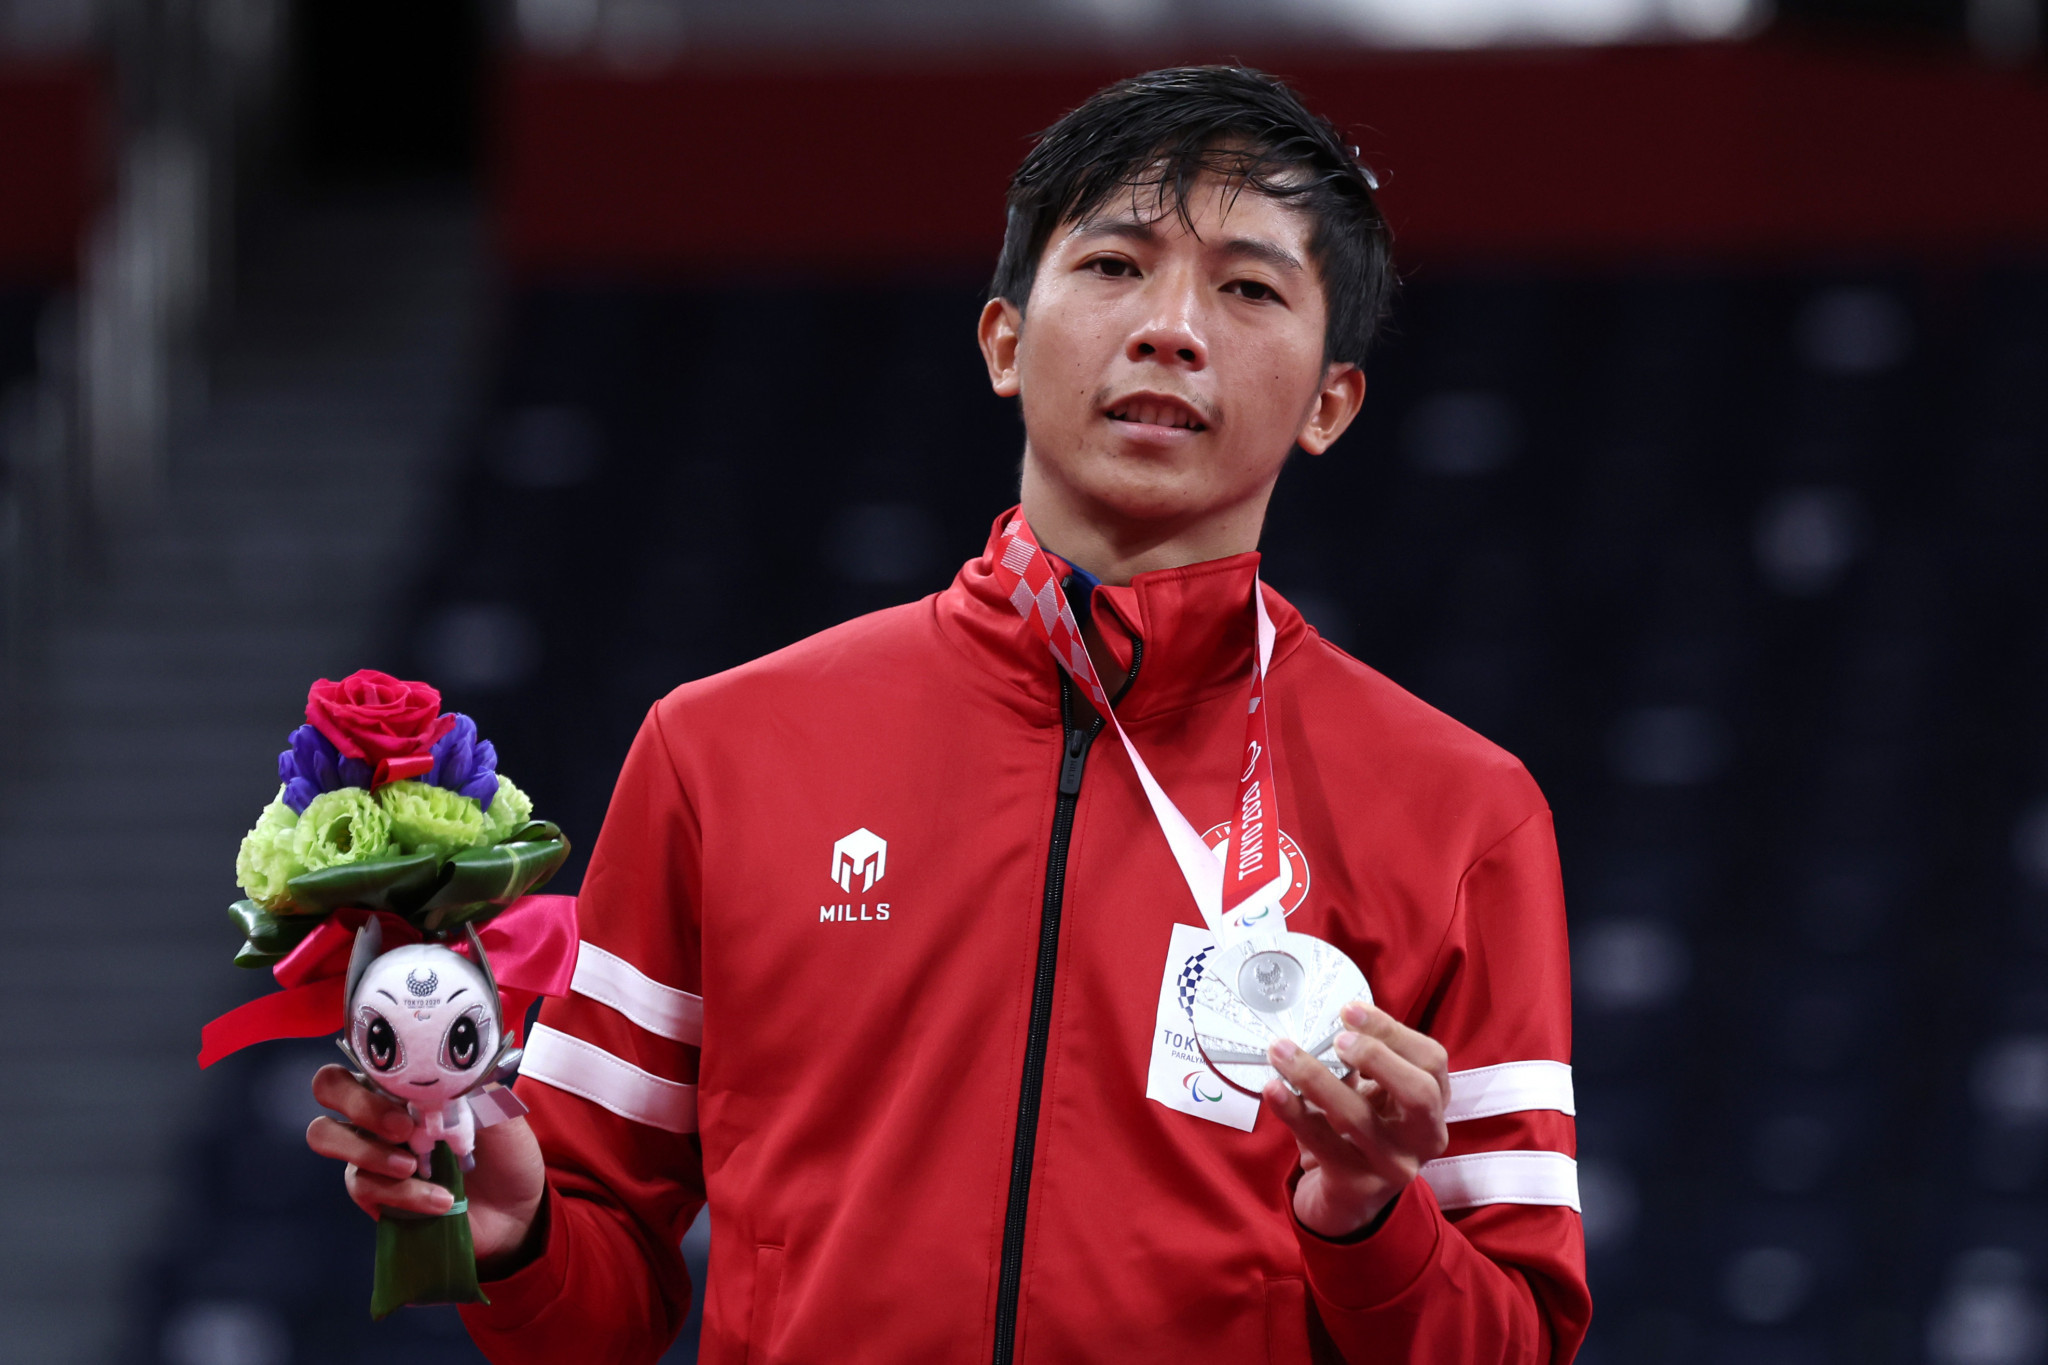 Indonesia's Dheva Anrimusthi lost to Cheah Liek Hou in the Tokyo 2020 Paralympics men's SU5 singles final ©Getty Images